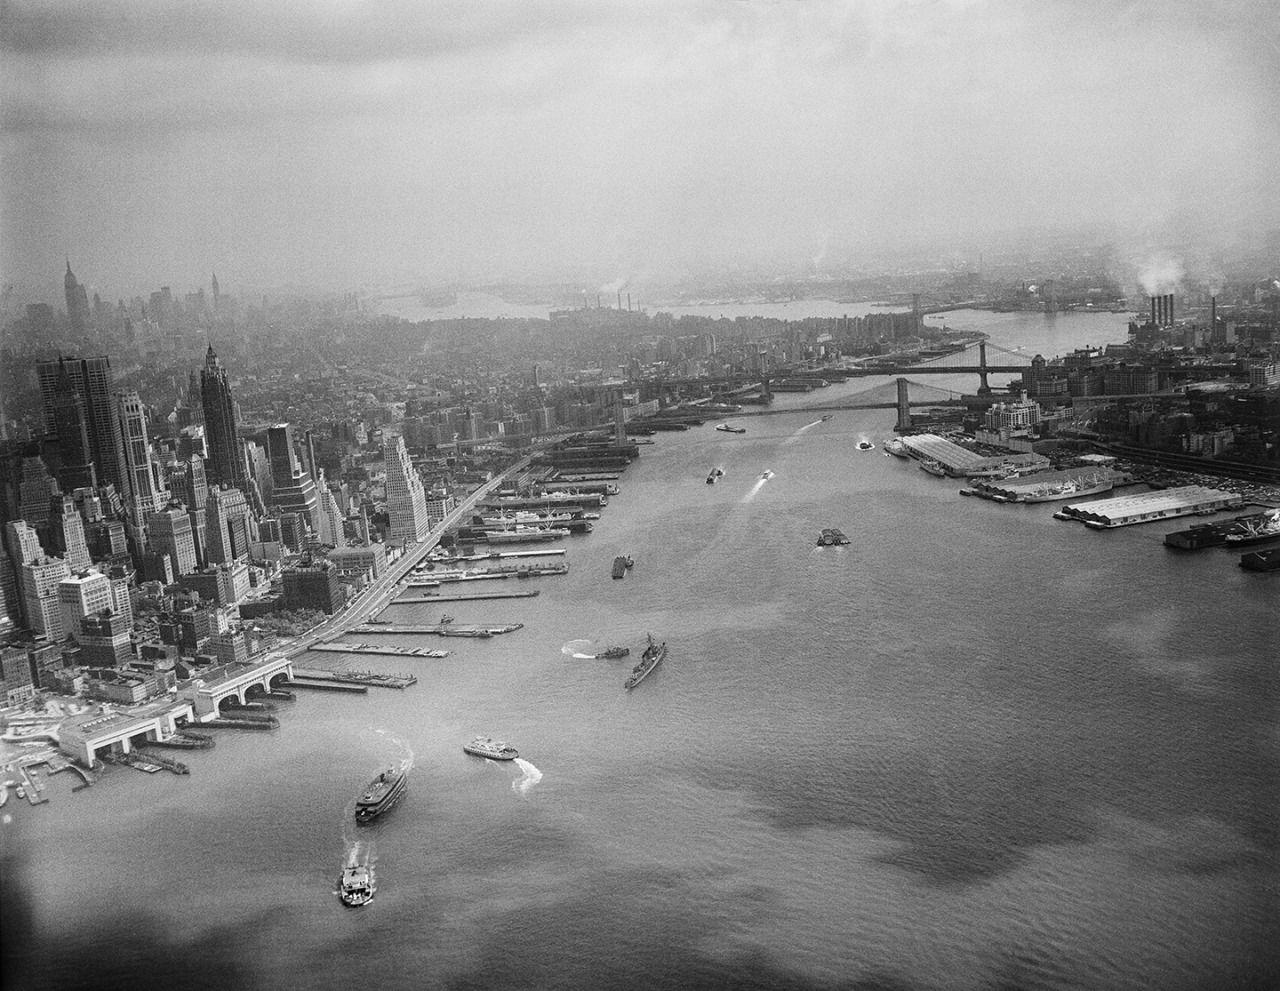 Aerial view of the East River, May 1960.
Just one of our stunning images of the Brooklyn Waterfront that will be on display at Photoville in Brooklyn Bridge Park starting today.
The exhibit will be on view from Friday September 11, through Sunday,...